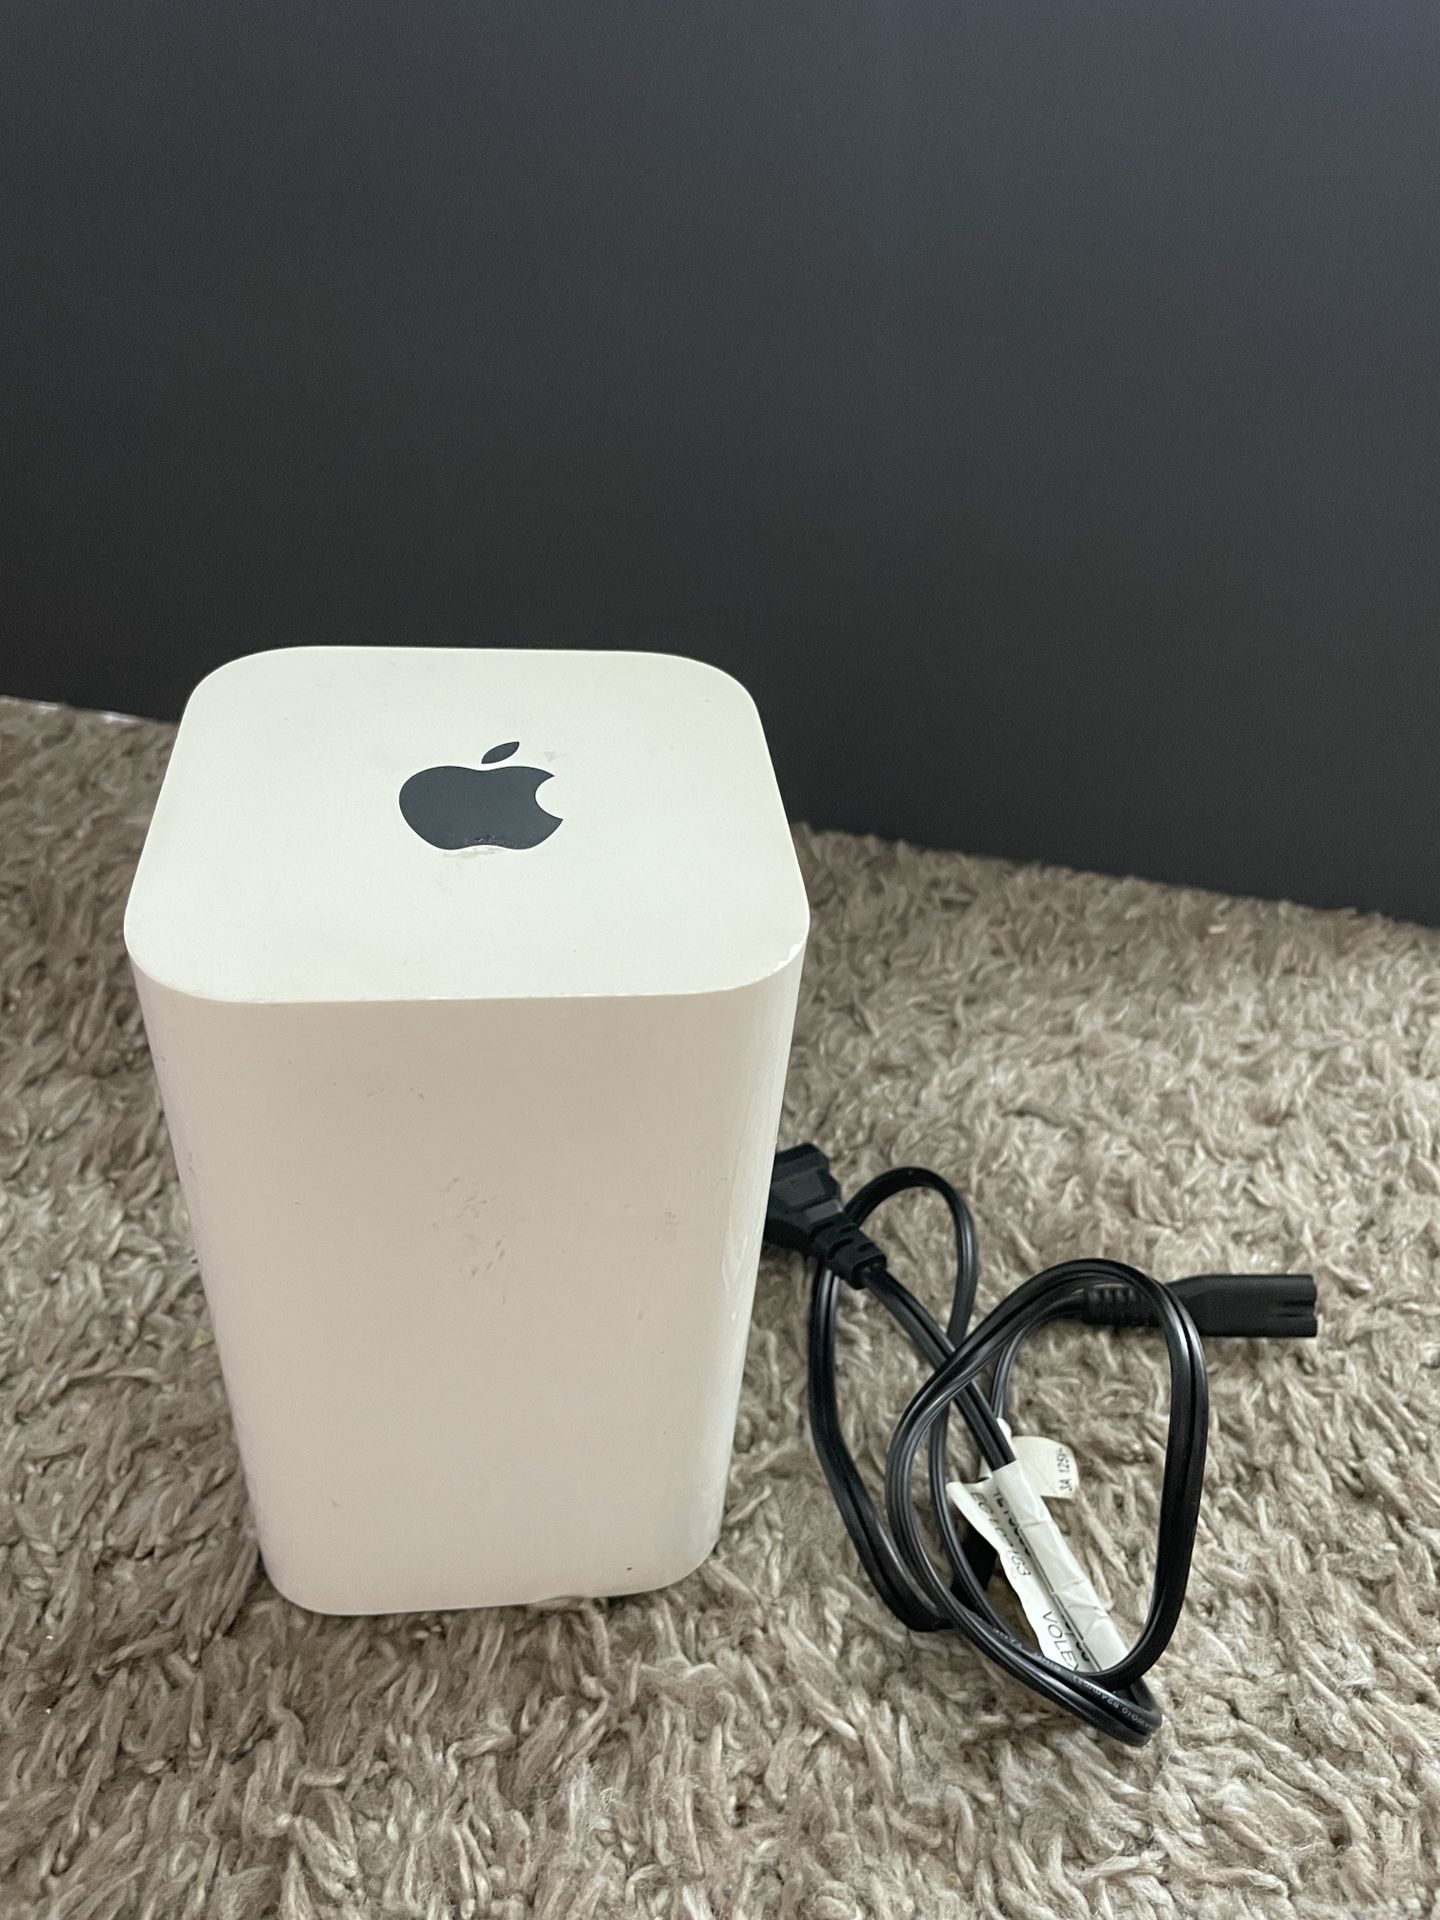 Apple AirPort Extreme A1521 3-Port Gigabit Wi-Fi 802.11 AC Router